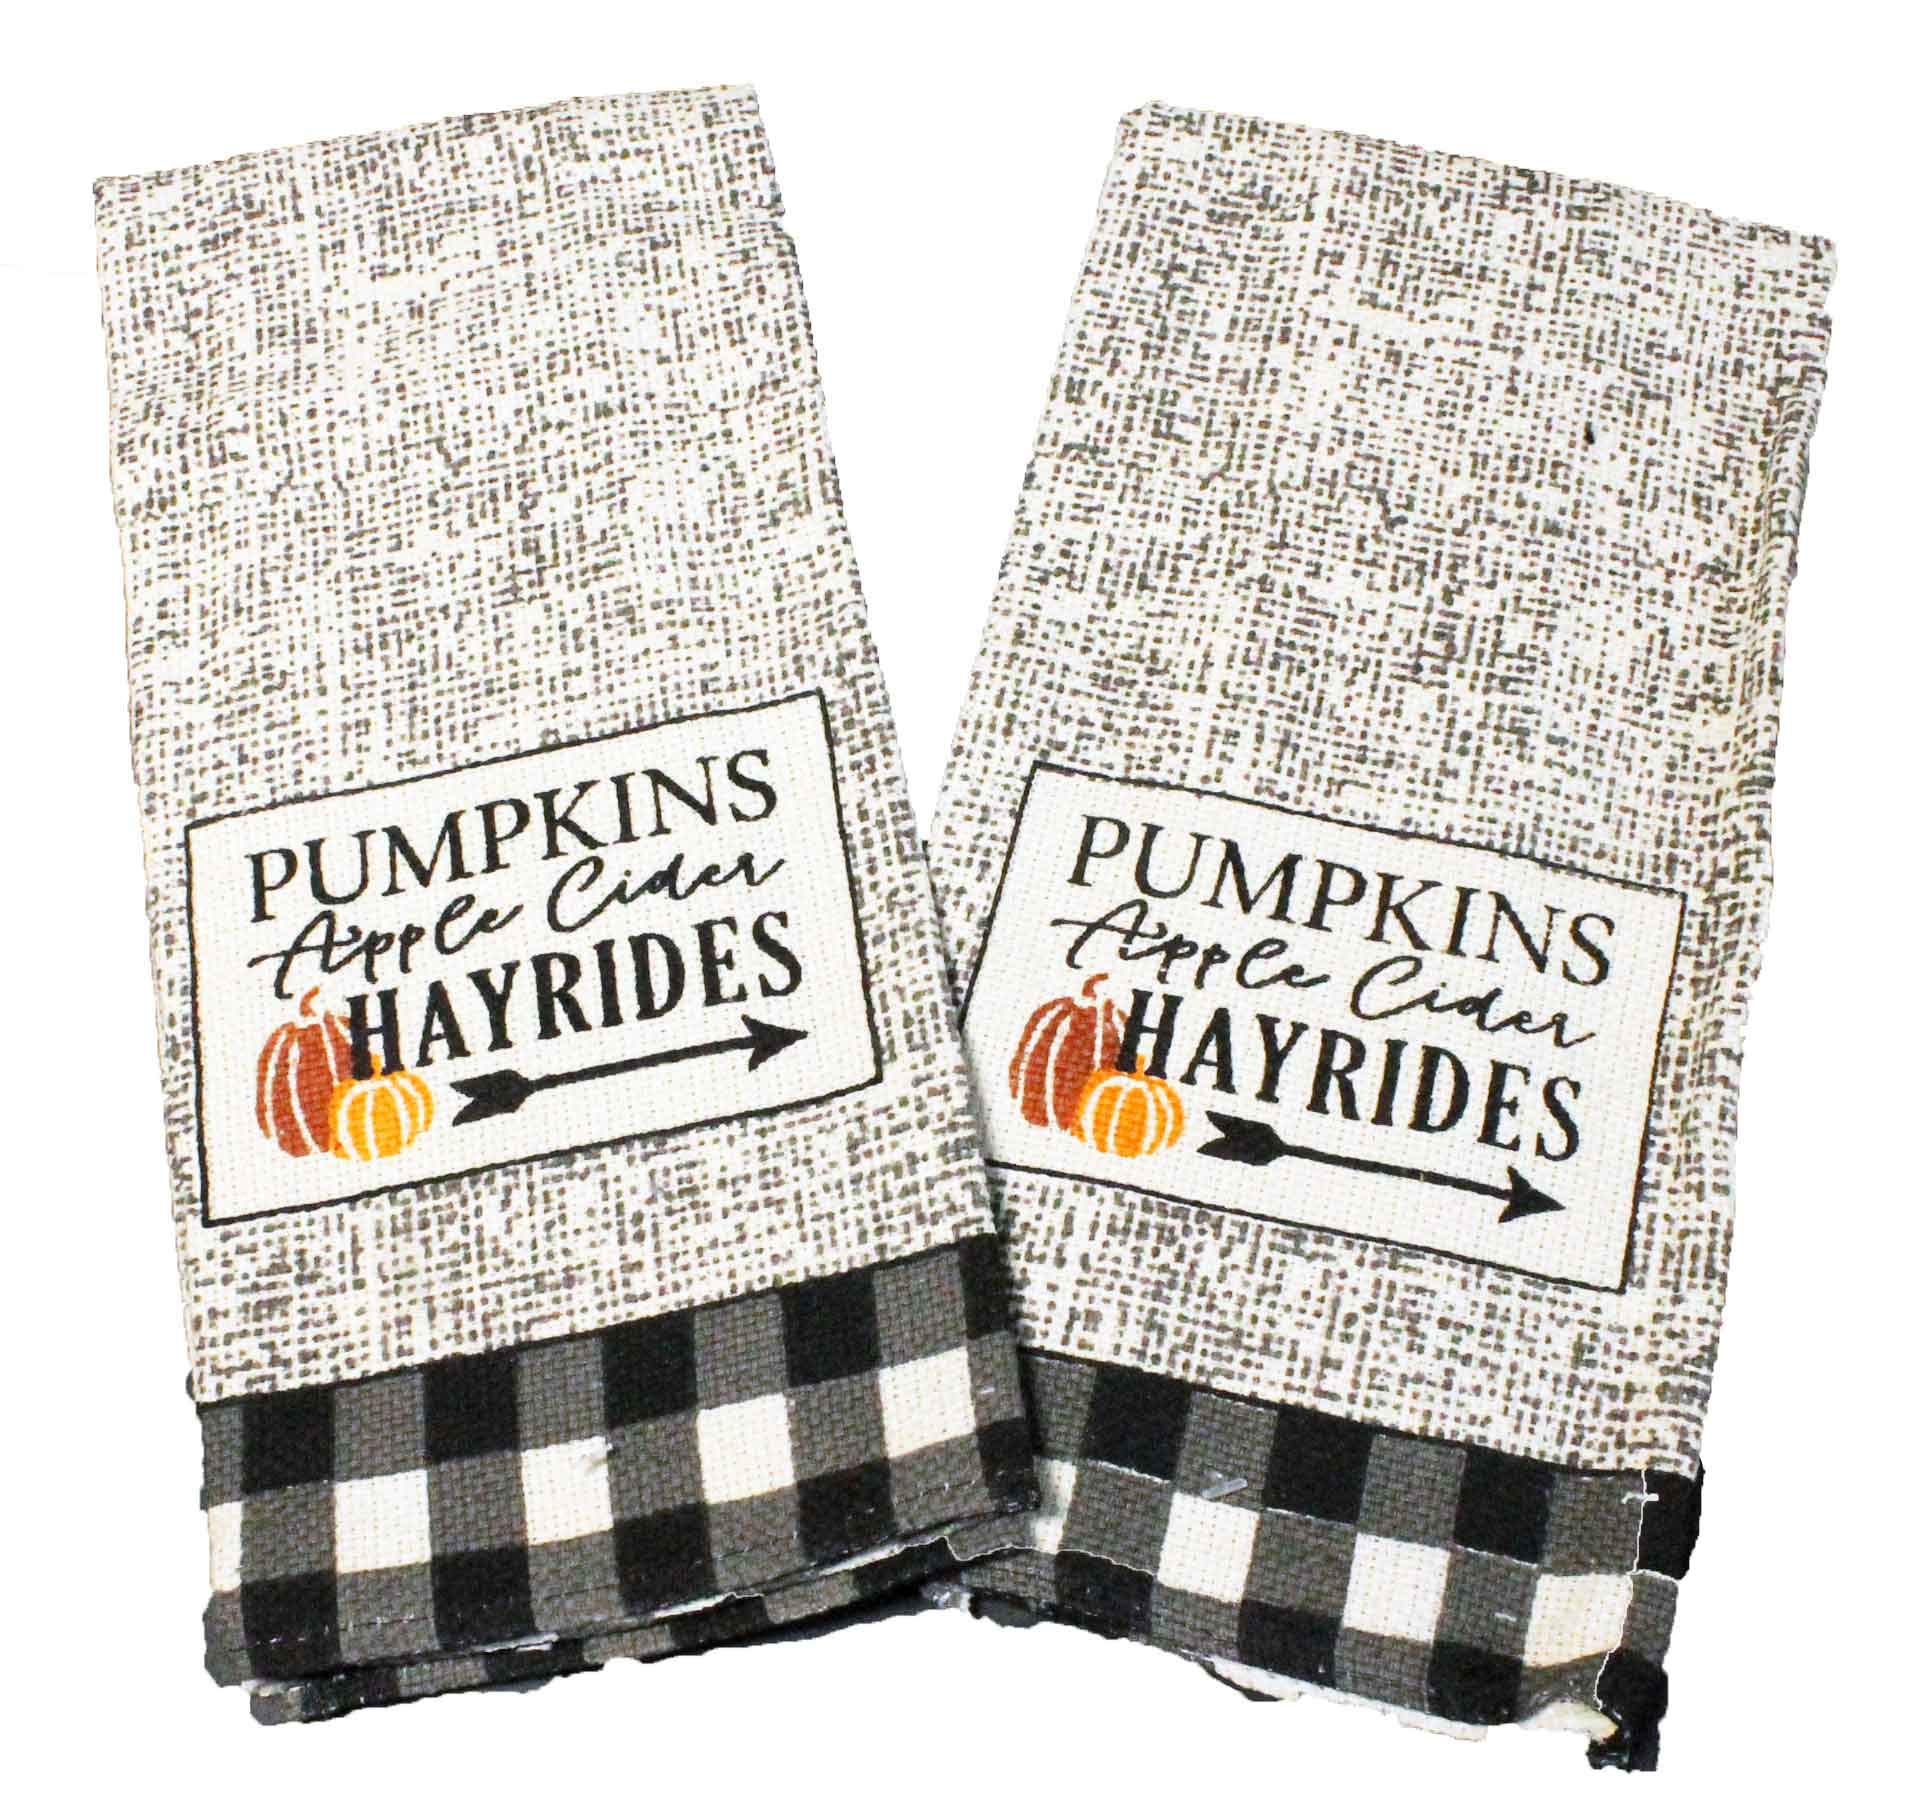 4 pc Fall Kitchen Set w/Kitchen Towels, Oven Mitt, Pot Holder - Buffalo Plaid Kitchen Set Pumpkin, Apple Cider, Hayrides Fall Kitchen Decor Set - Comes in an Organza Bag so It's Ready for Giving